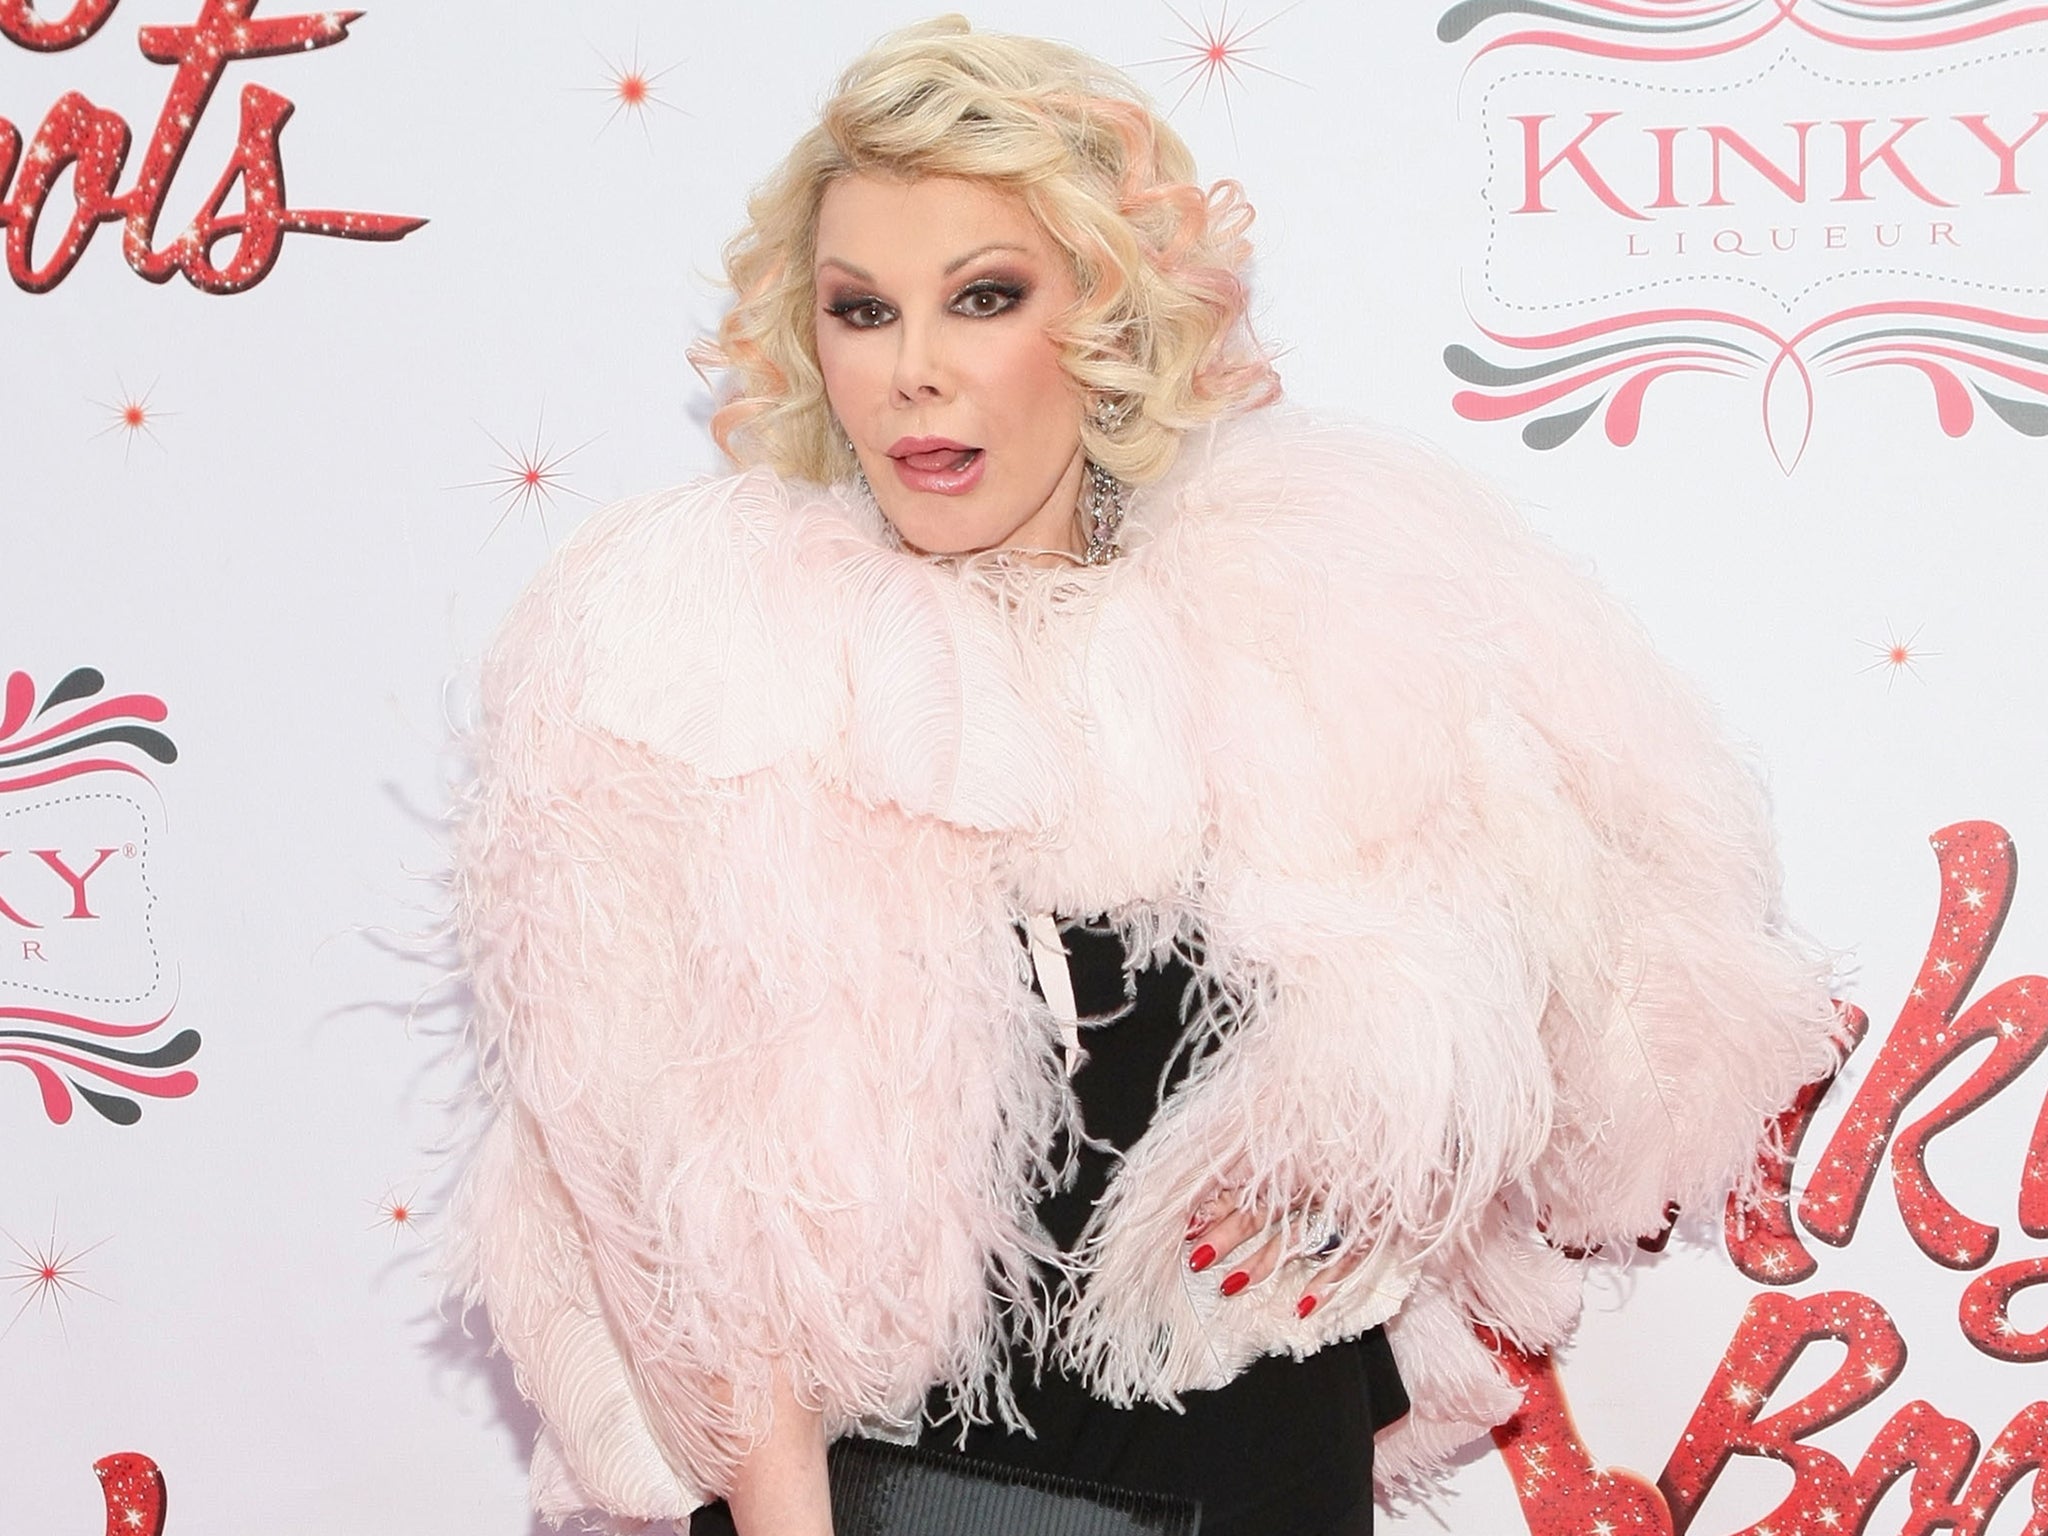 Joan Rivers attends the Media Opening for Kinky Boots on Broadway, 'KinkyBway', at the Al Hirschfeld Theatre on 4 April 2013 in New York City